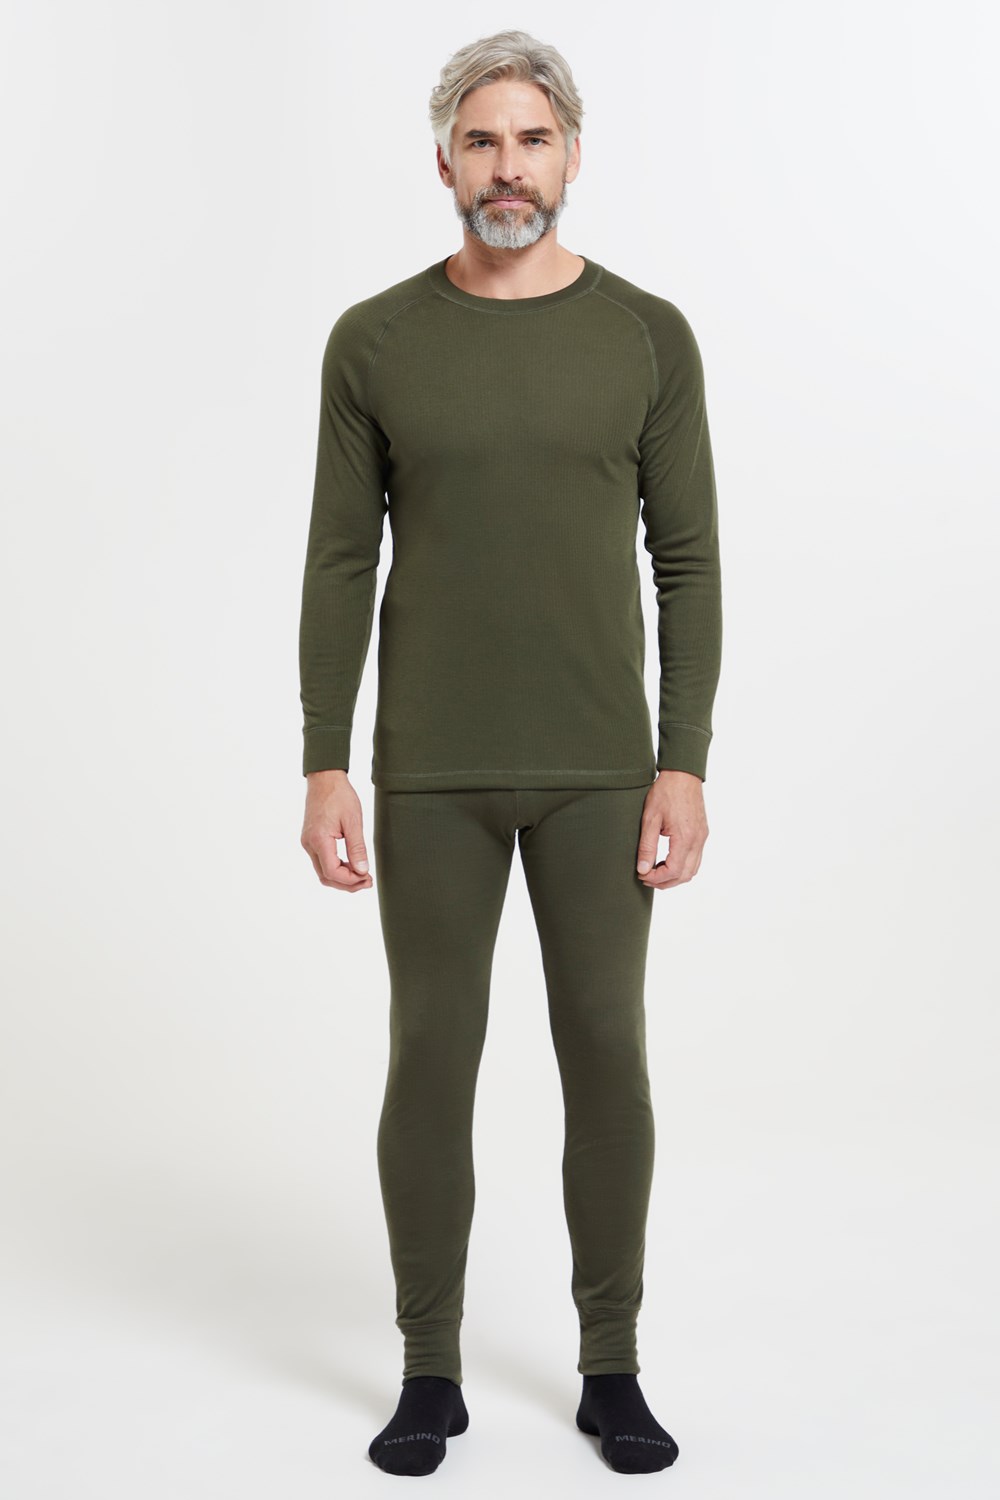 Mountain Warehouse Mens Long Sleeved Round Neck Top Thermal Baselayer ...